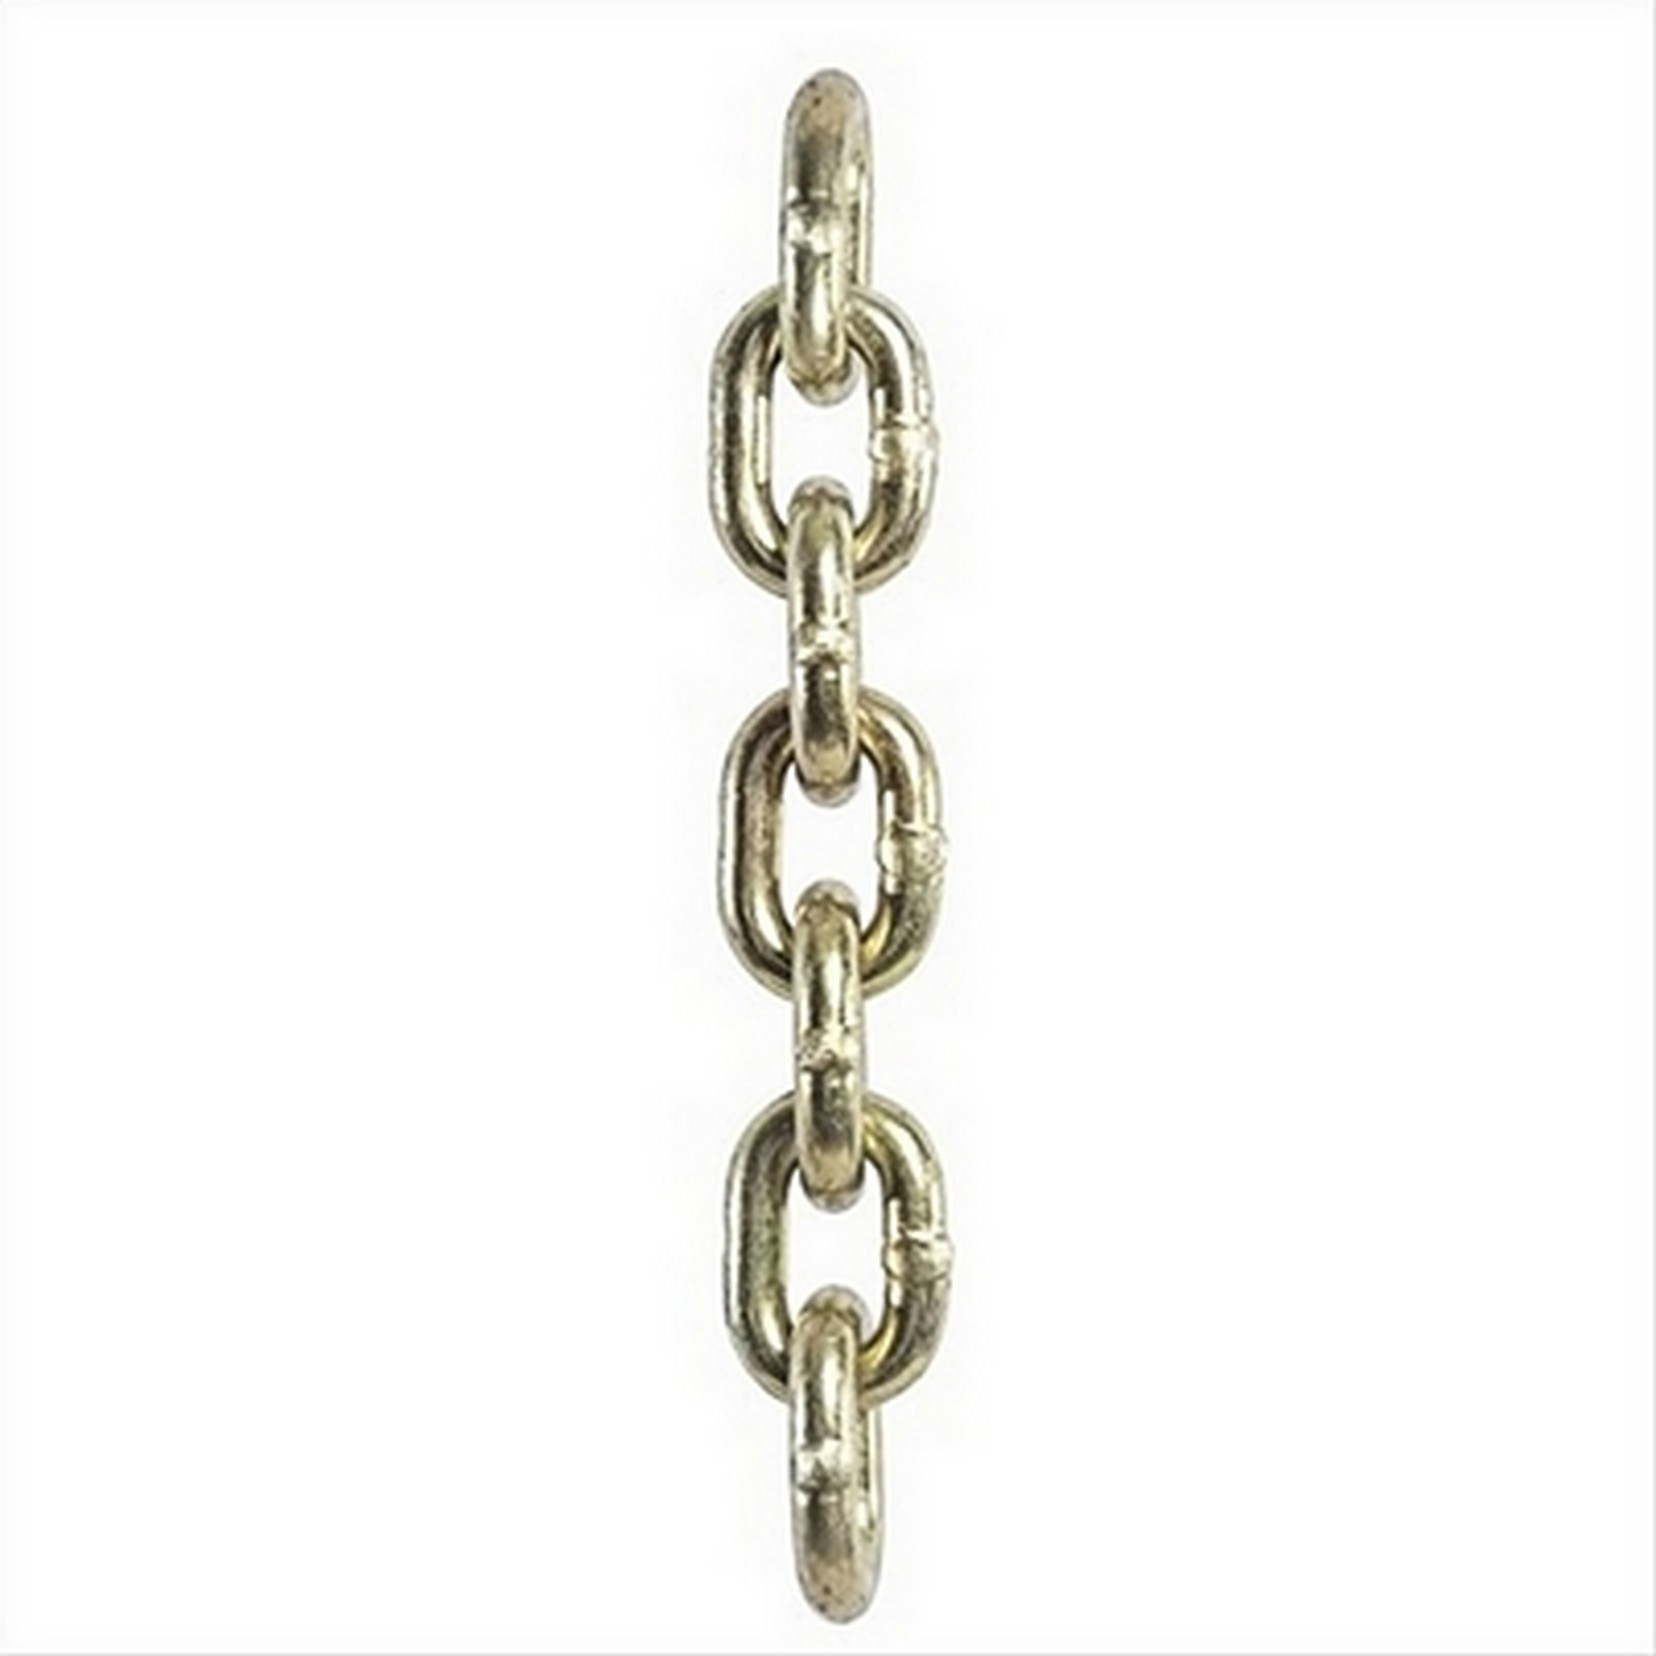 CHAIN HIGH TENSILE GR 70 ( NOT FOR LIFTING ) (5)